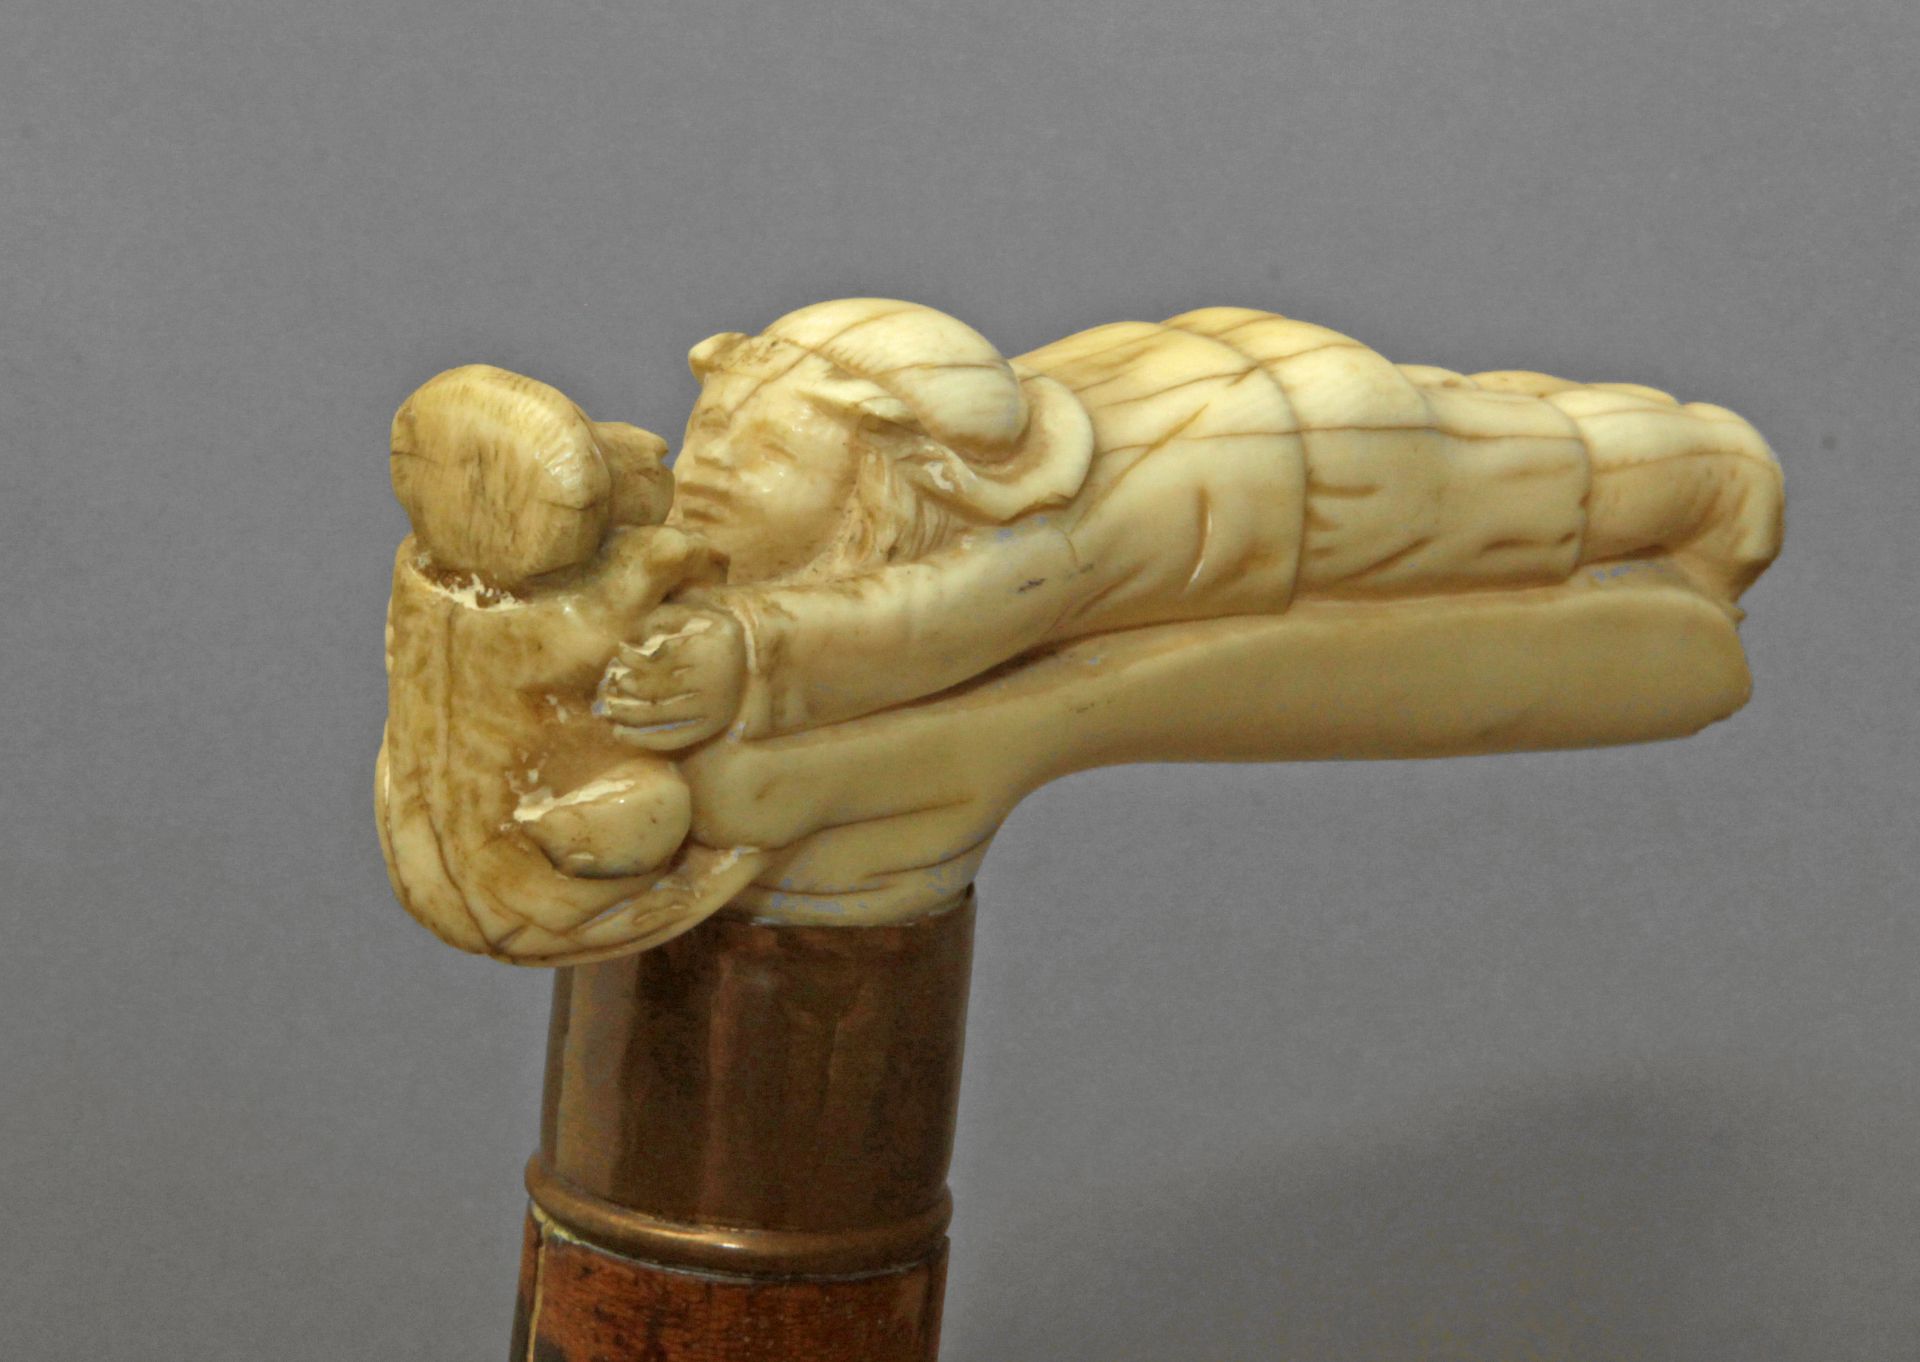 An ivory handled walking cane, Central Europe, 19th century - Image 2 of 8